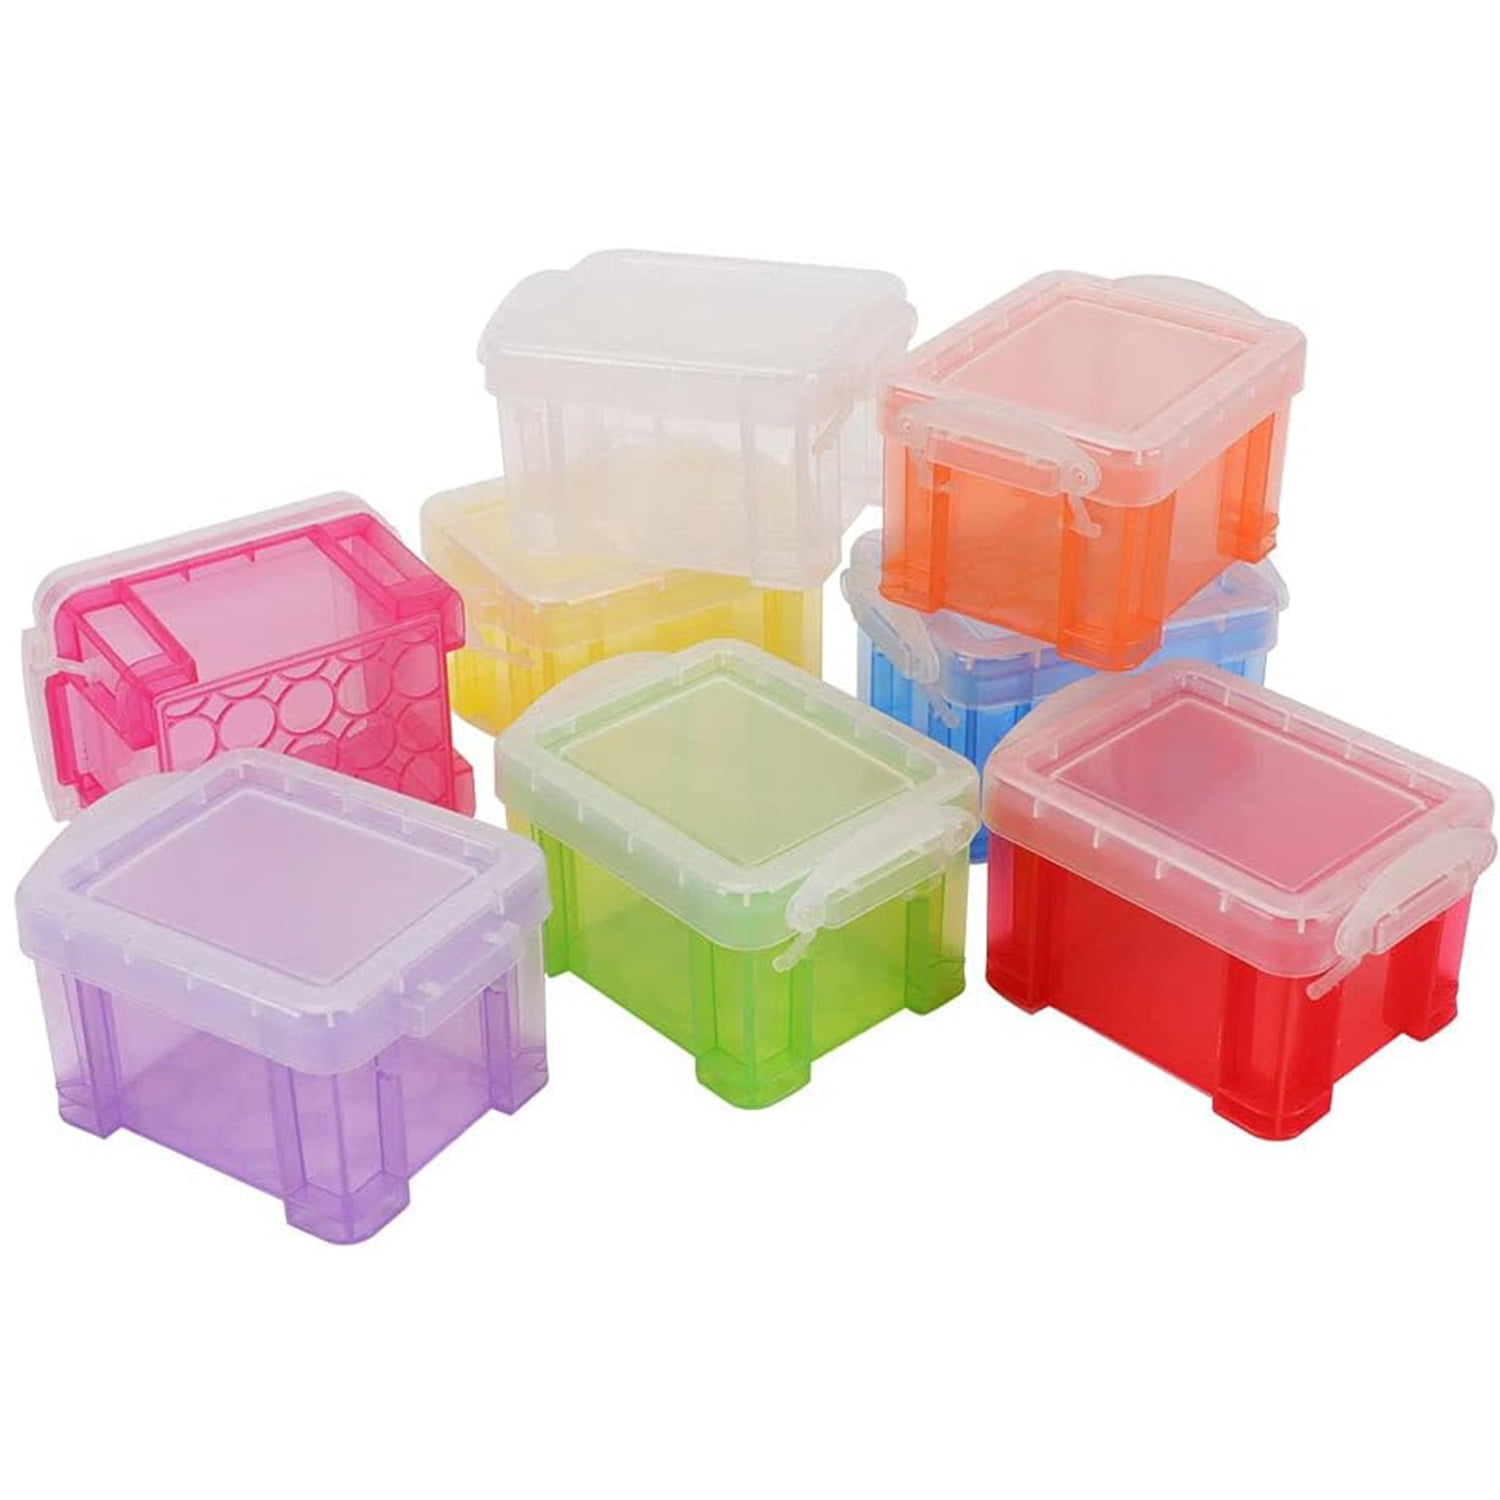 Zerodeko 5Pcs Box portable storage box storage containers for organizing  containers with lids for organizing storage bin organizing containers desk